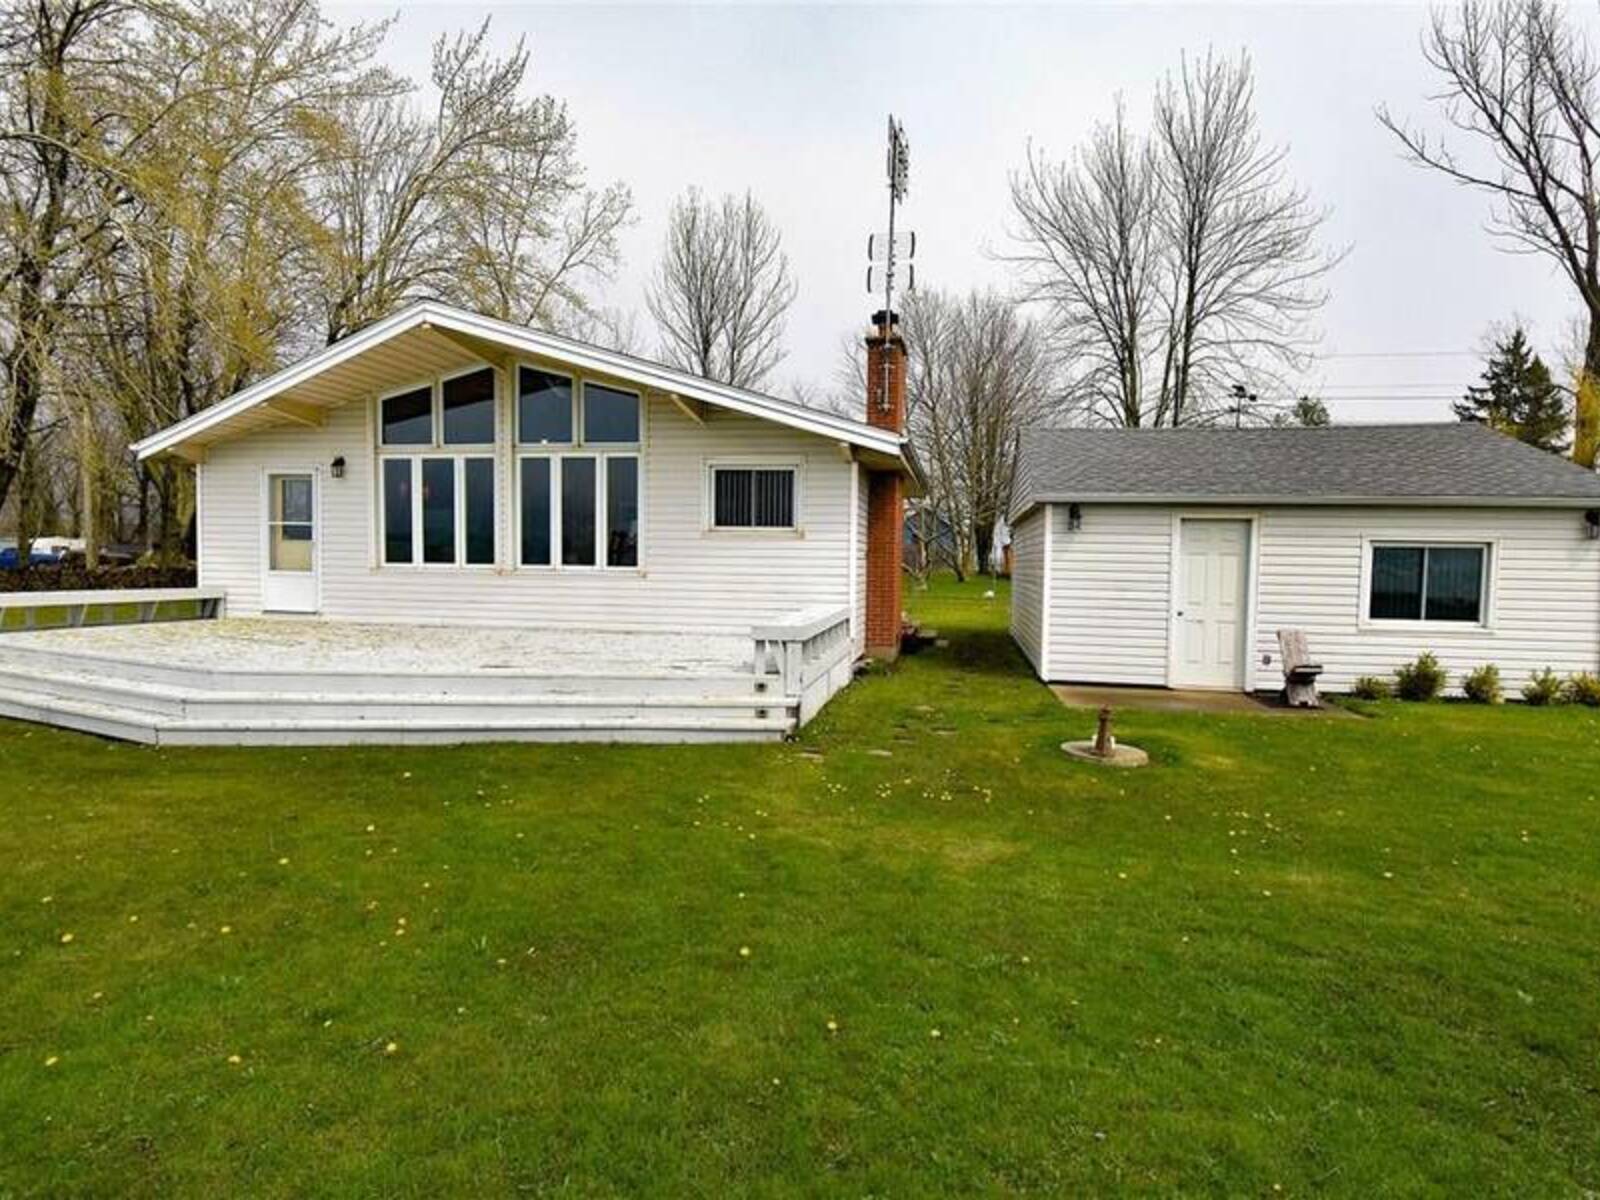 13 ERIE HEIGHTS Line, Dunnville, Ontario N0A 1K0